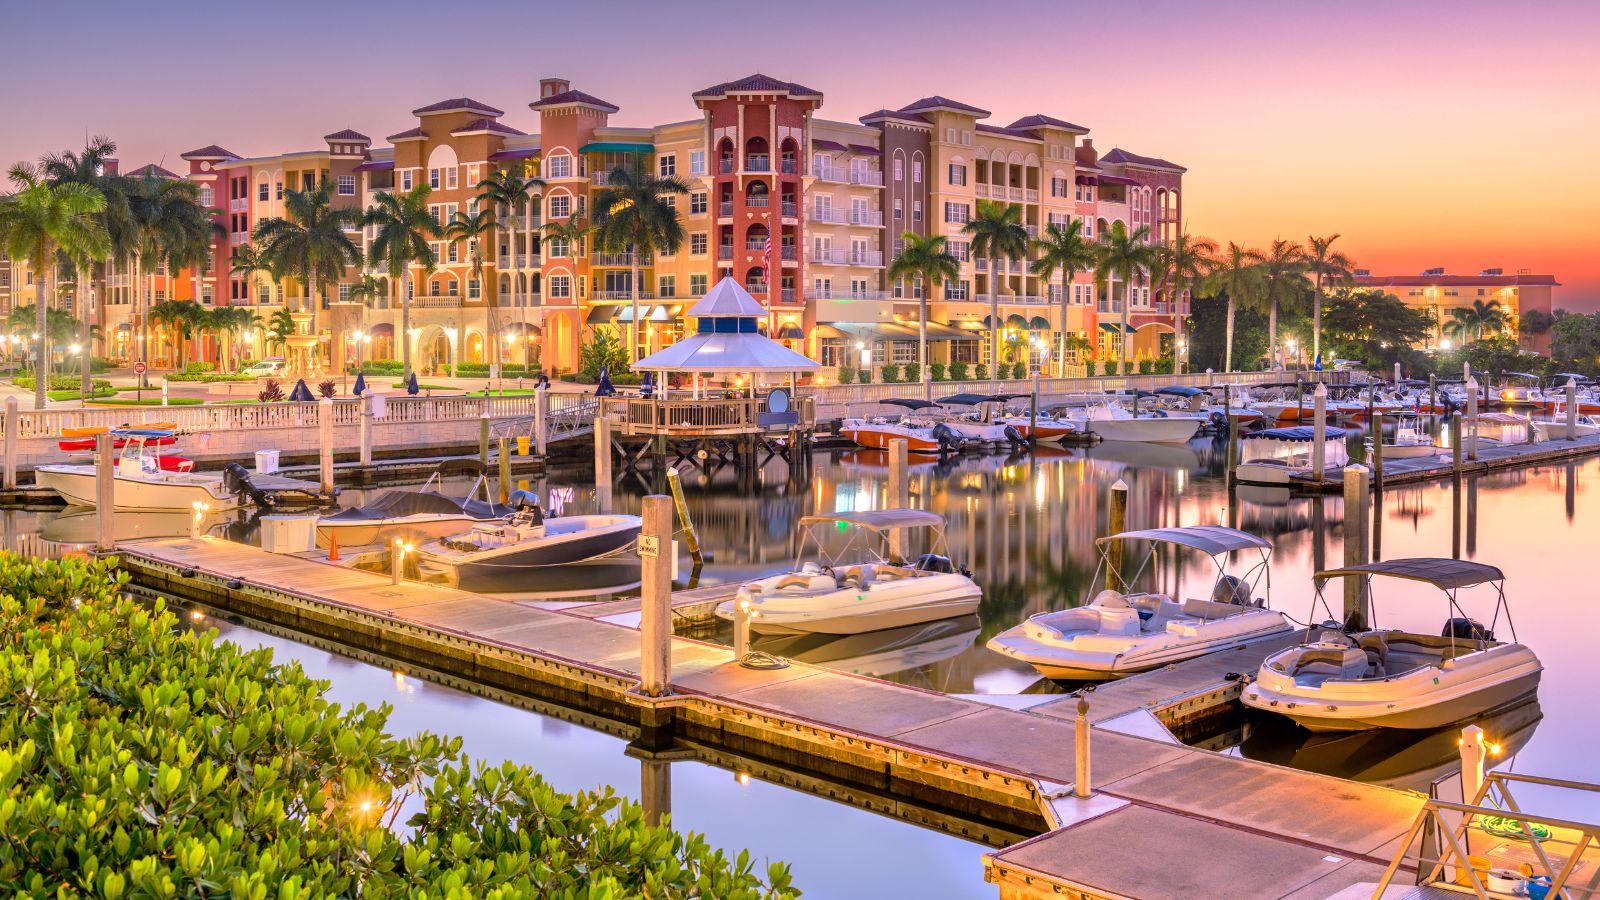 <p>The average home value in Naples is $611,000. It’s a city that’s home to a large number of millionaires, which adds to its appeal. Naples is a city to move to if you enjoy nature. It’s close to beautiful beaches, golf courses, and natural preserves. </p>